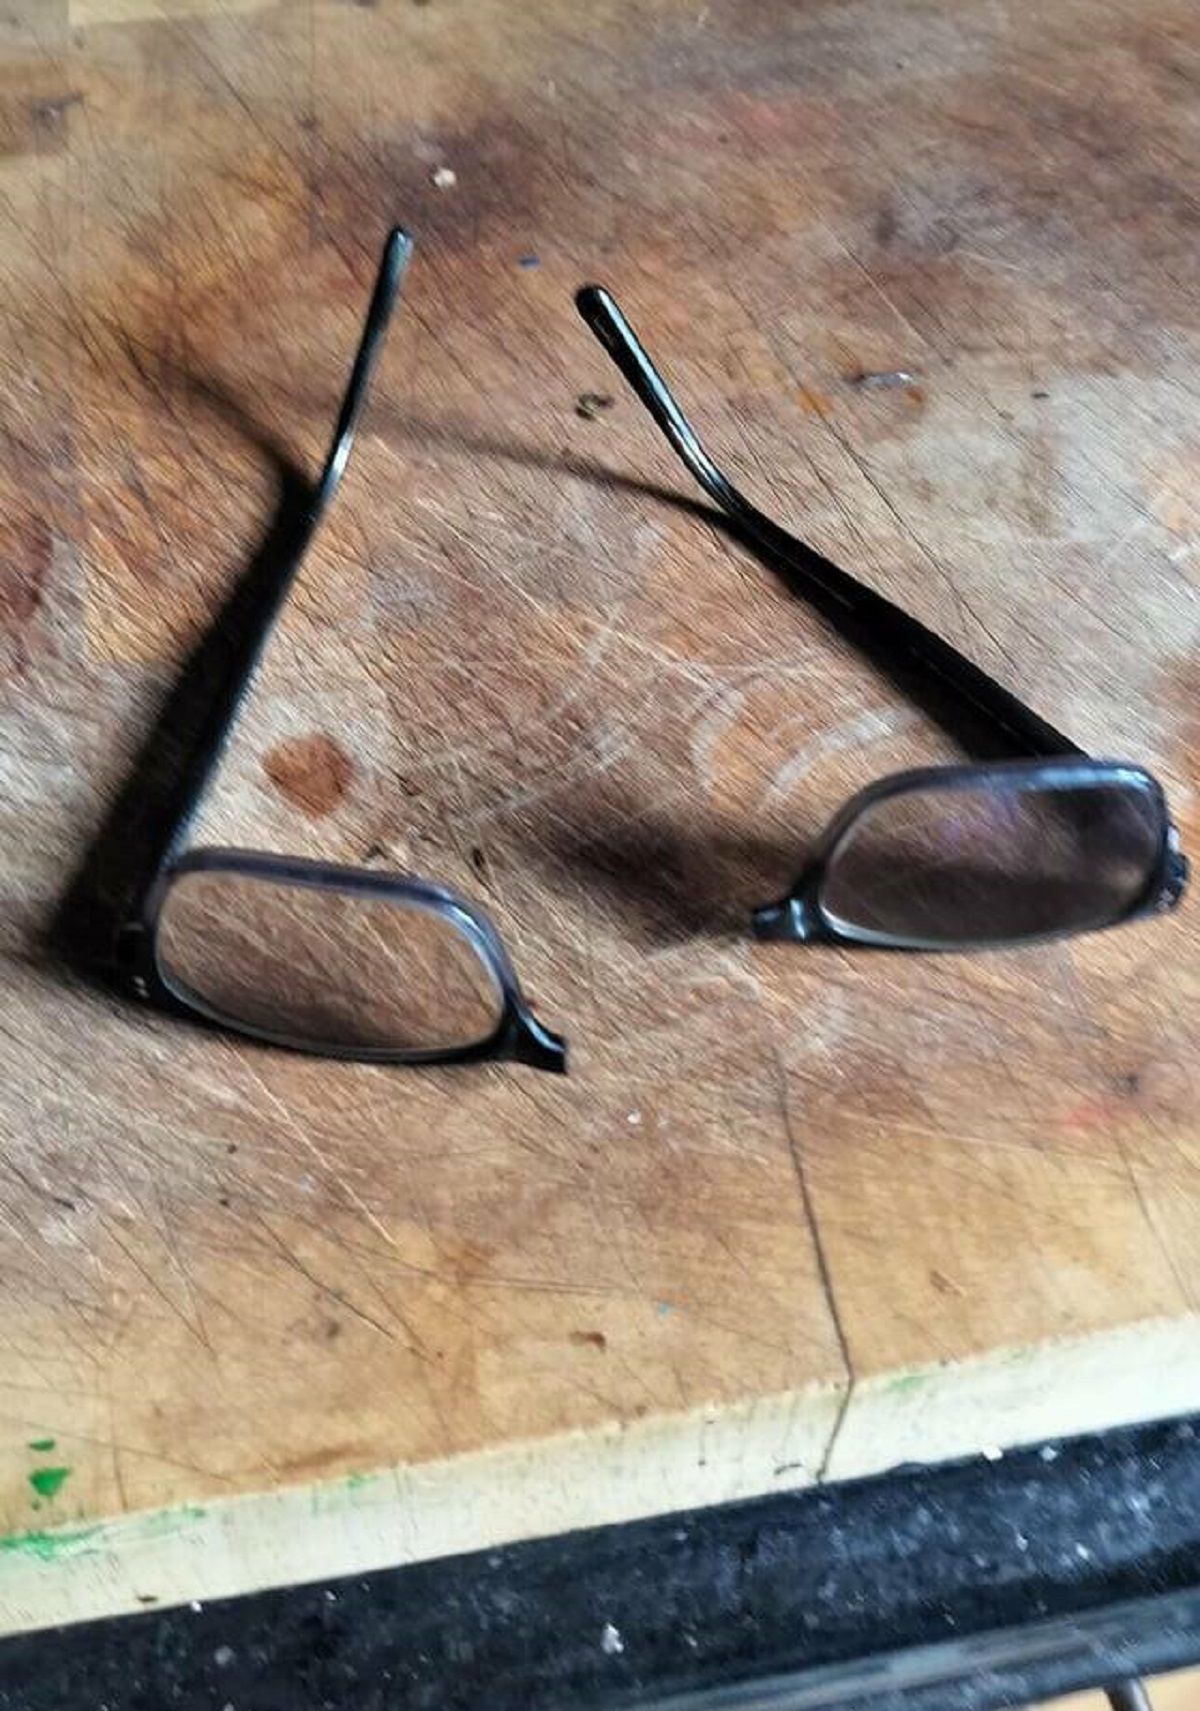 "Just before leaving for work, my only pair of glasses snapped in half."